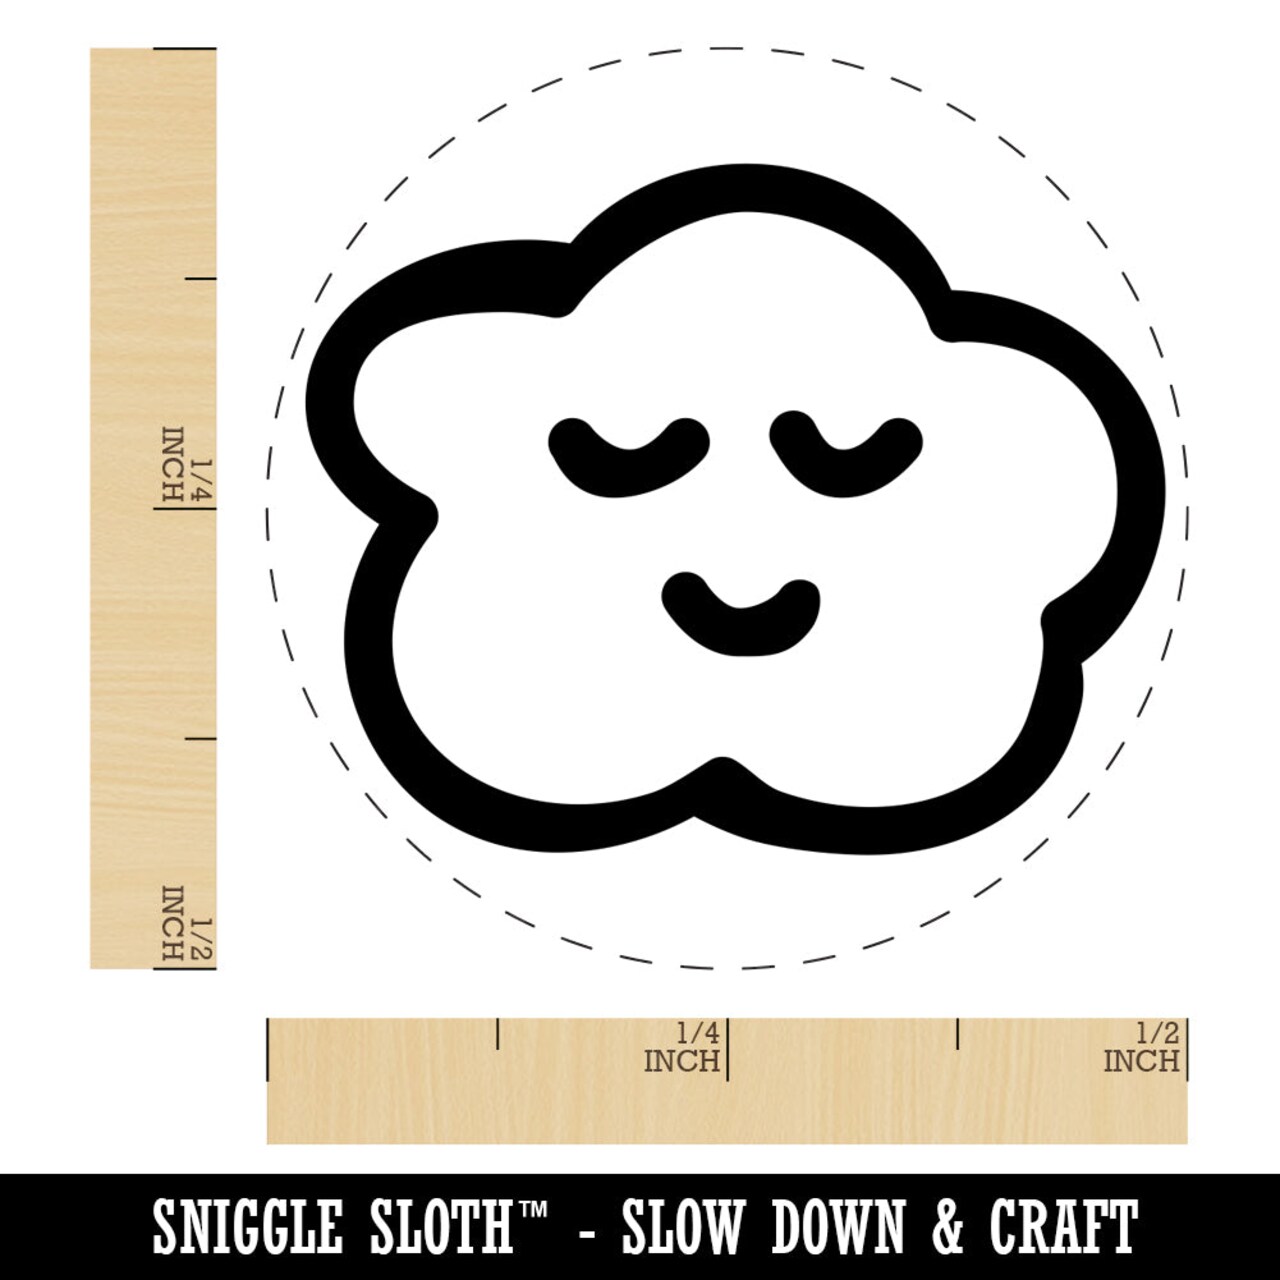 Sleeping Cloud Doodle Self-Inking Rubber Stamp for Stamping Crafting Planners